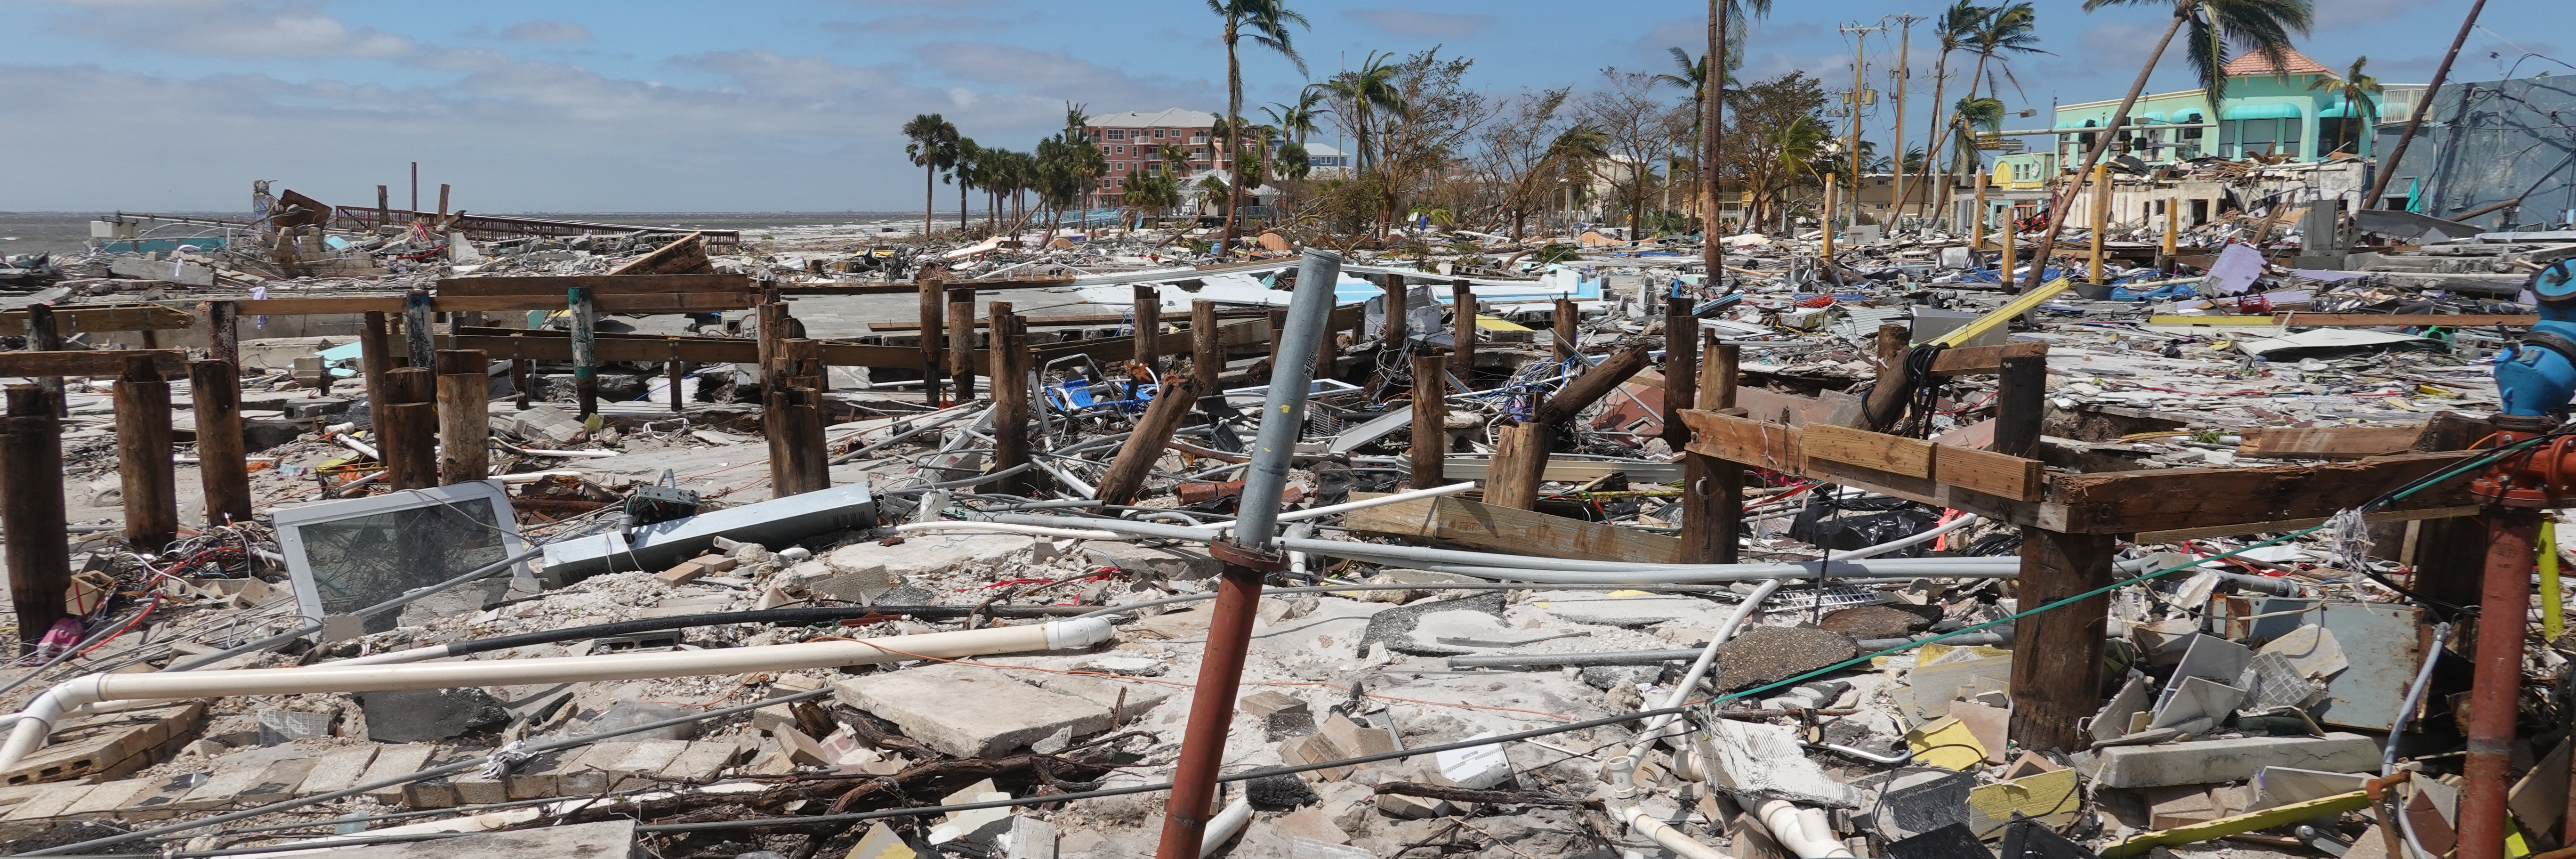 Hurricanes, typhoons, cyclones – the natural hazards with the highest losses